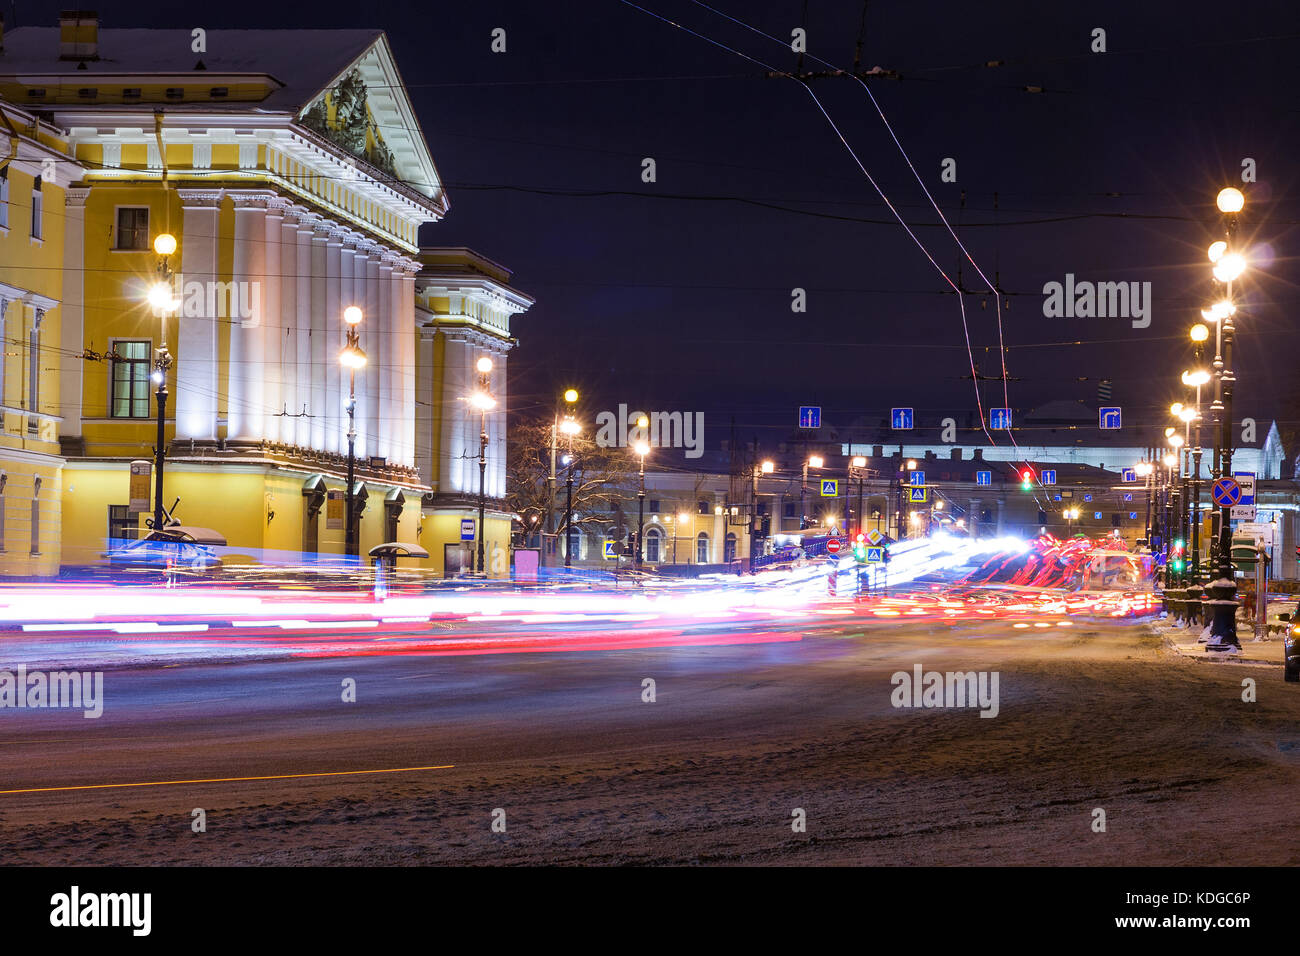 Old historical architecture landmark and touristic spot in Saint Petersburg, Russia: old historical exchange building by a winter night illuminated wi Stock Photo